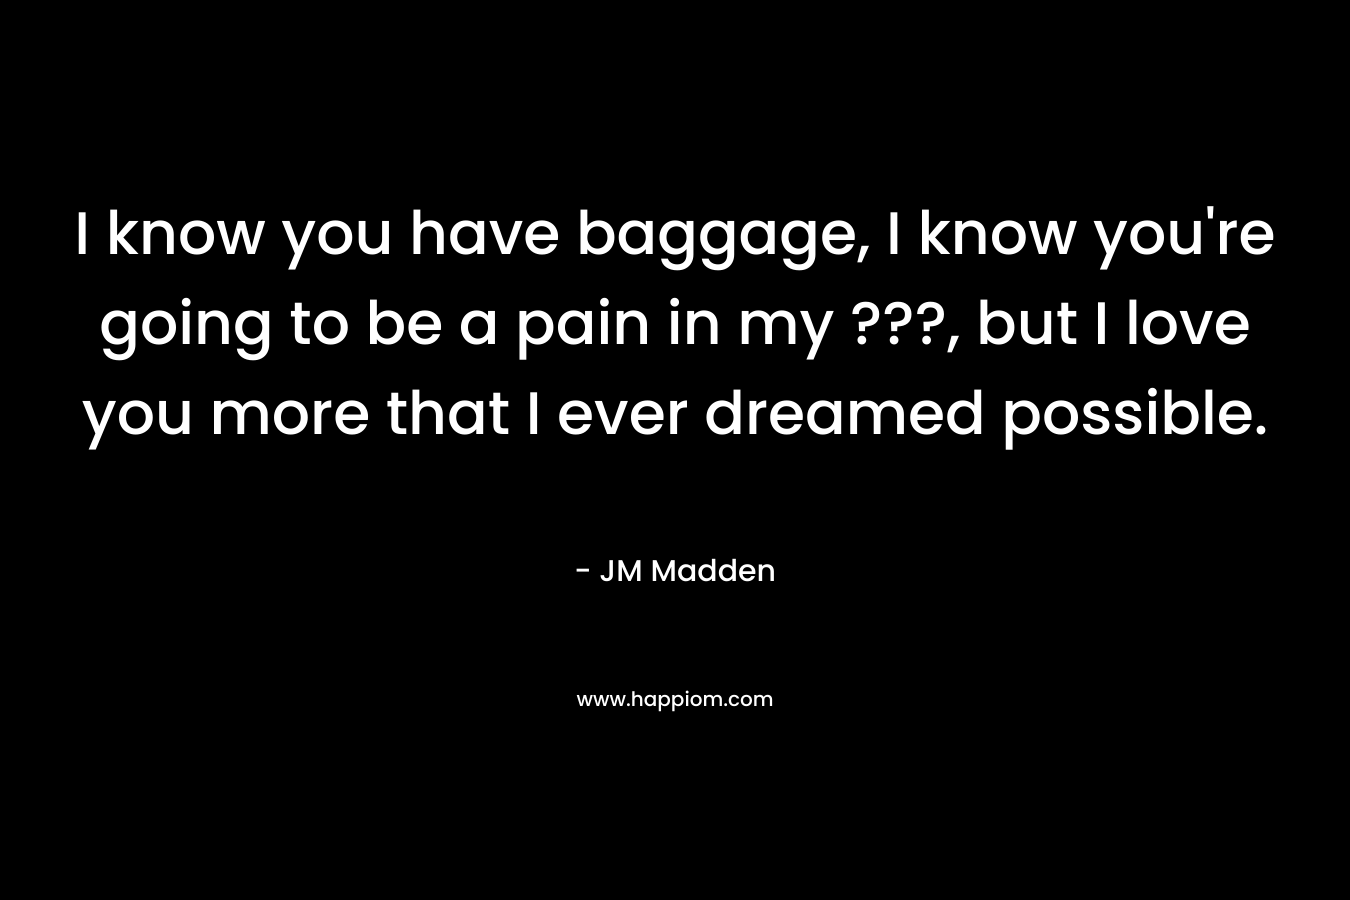 I know you have baggage, I know you’re going to be a pain in my ???, but I love you more that I ever dreamed possible. – JM Madden